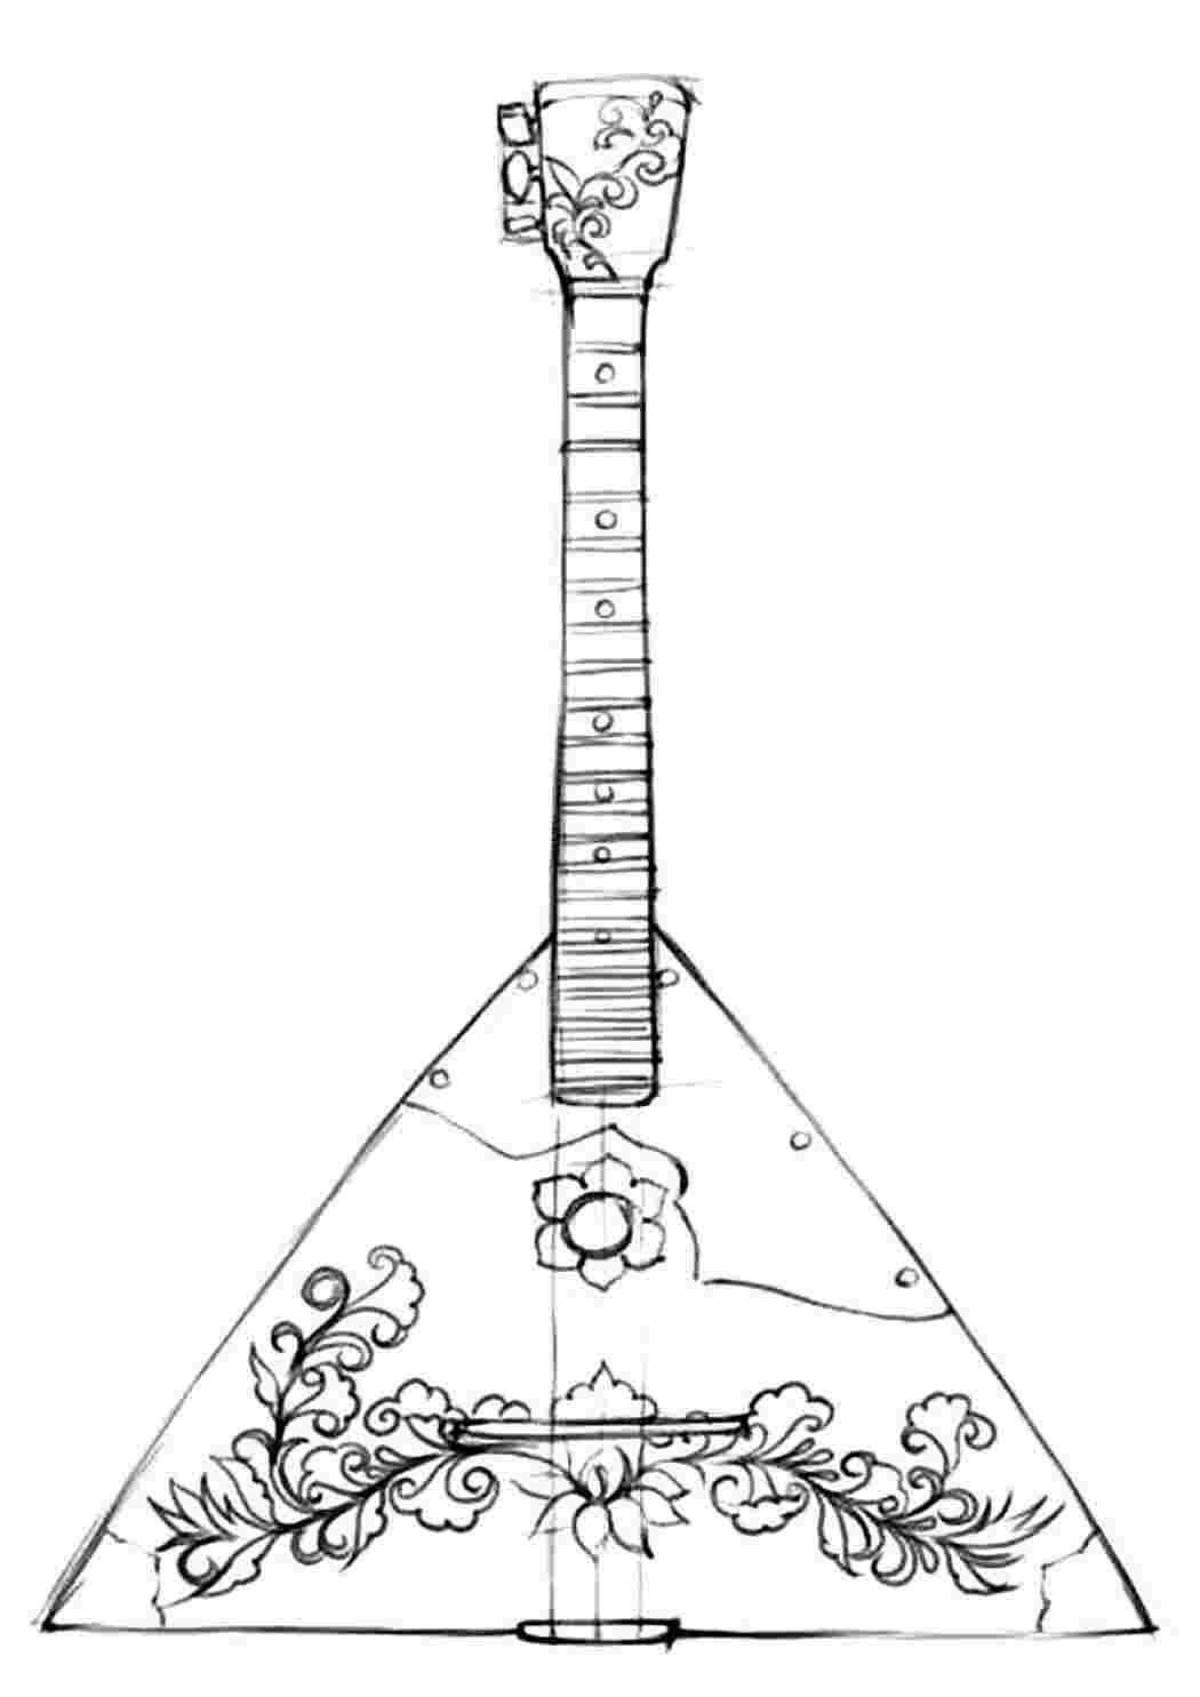 Colorful coloring pages with Russian folk instruments for children